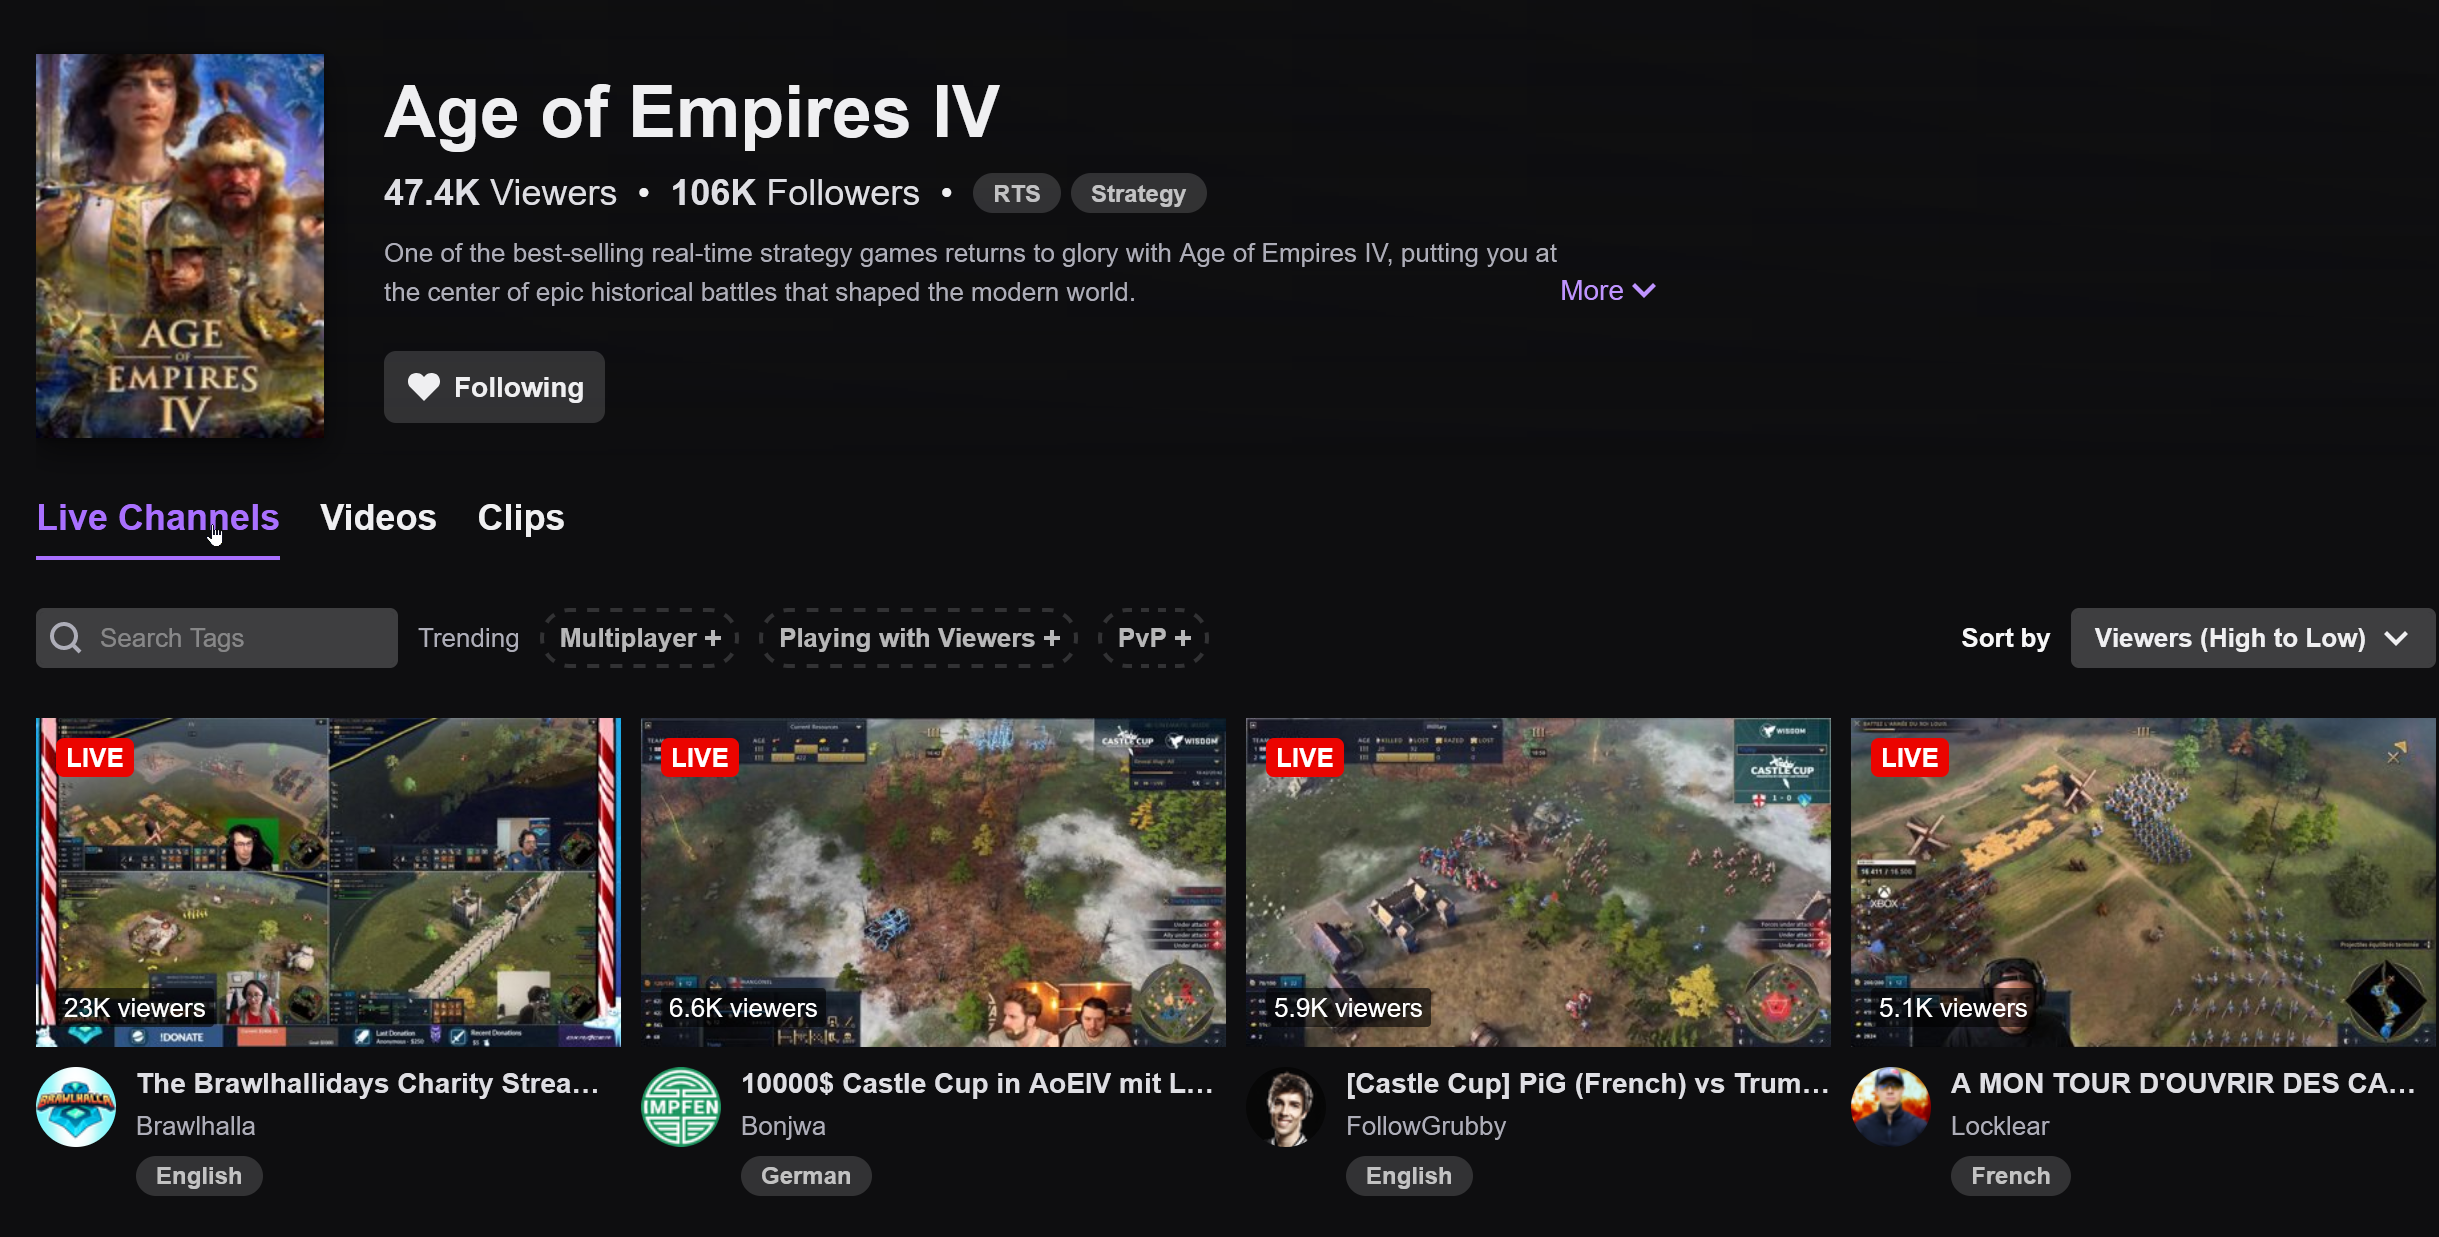 2021-12-17 23_41_12-Age of Empires IV - Twitch — Mozilla Firefox.png